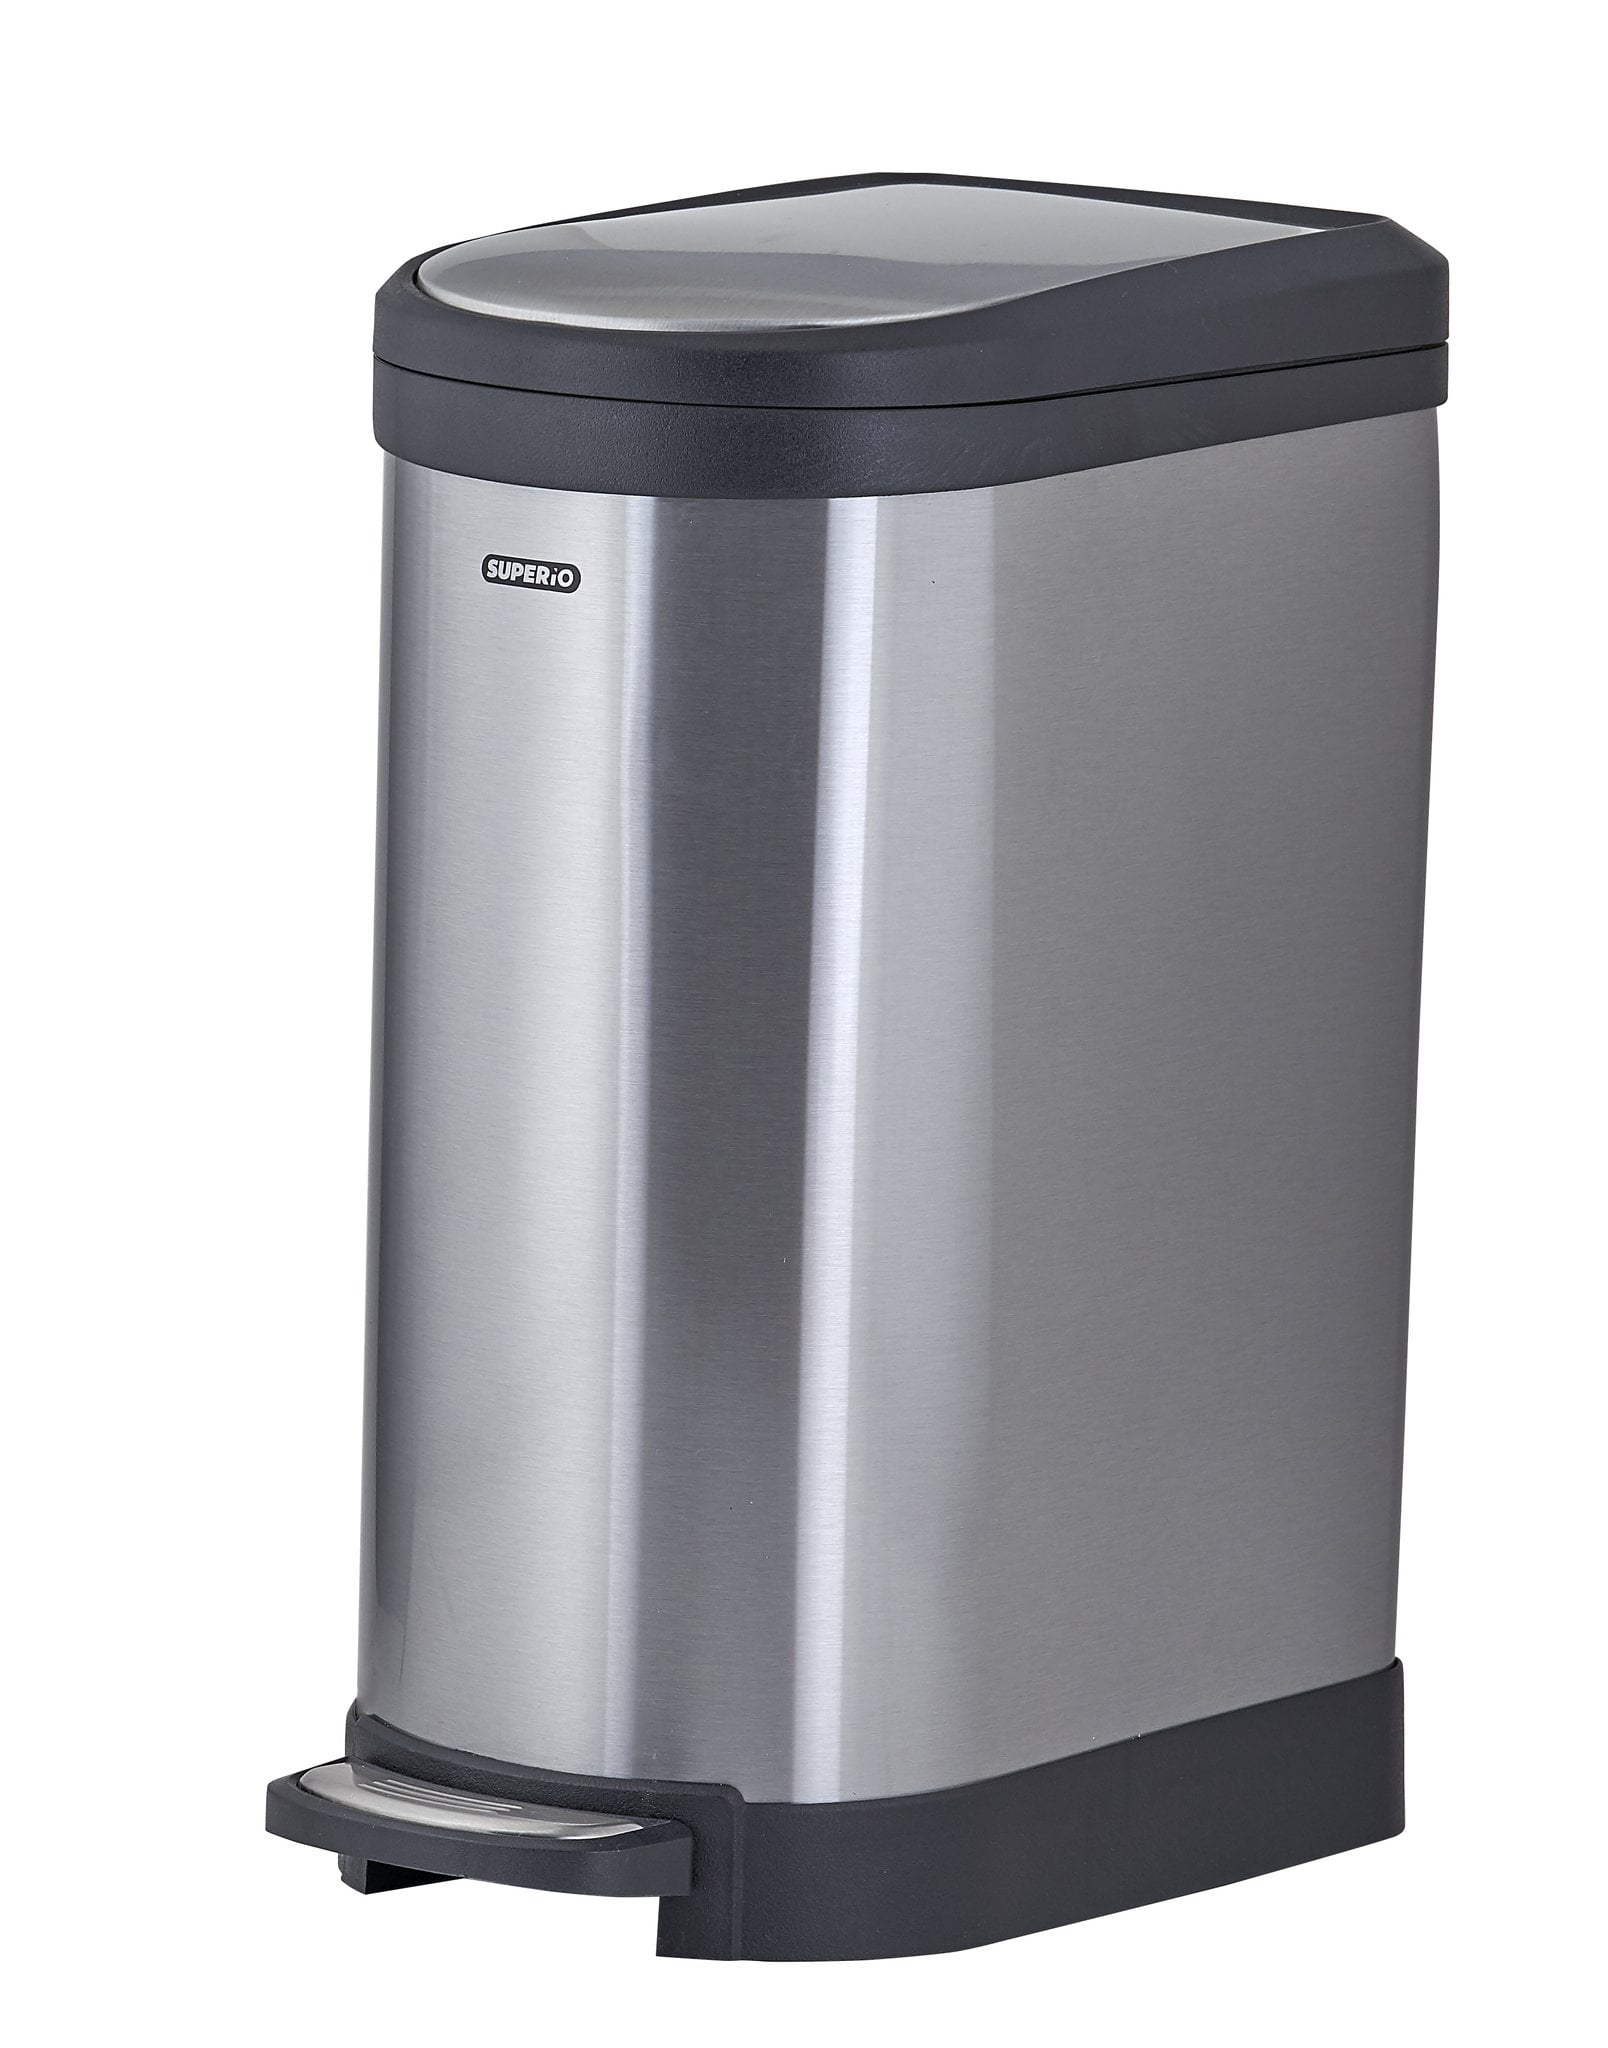 Superio Stainless Steel Garbage Pail - 10 Liter / 2.6 Gallon Narrow Narrow Stainless Steel Trash Can